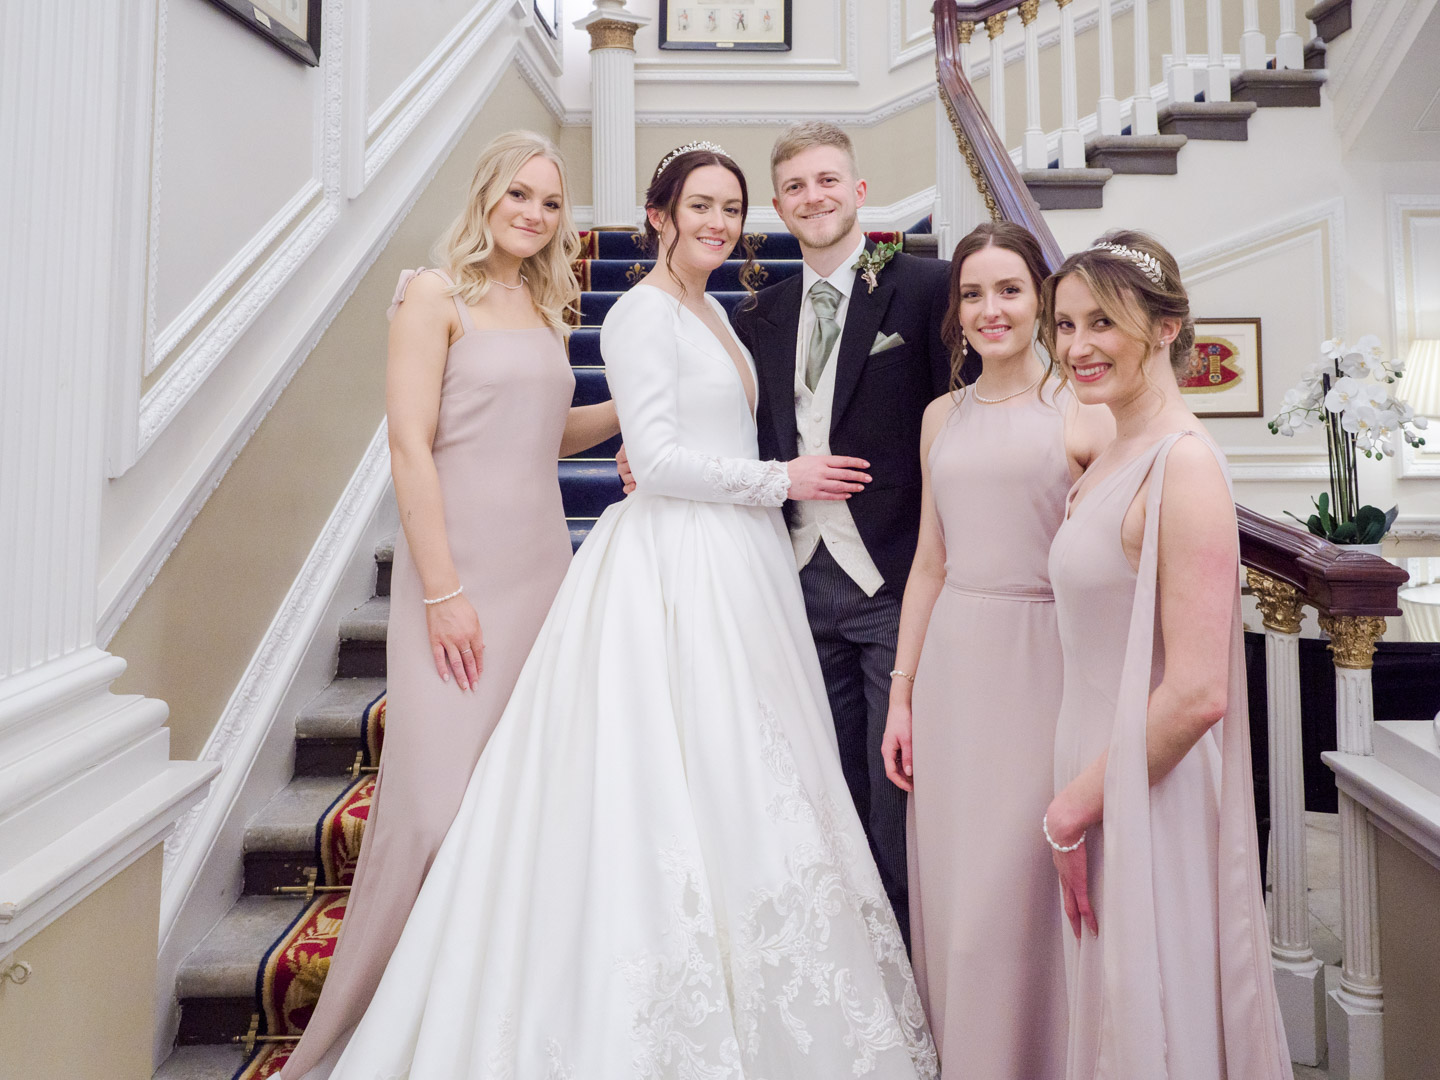 Bride, groom and bridesmaids on the stairs at the Naval and Military Club